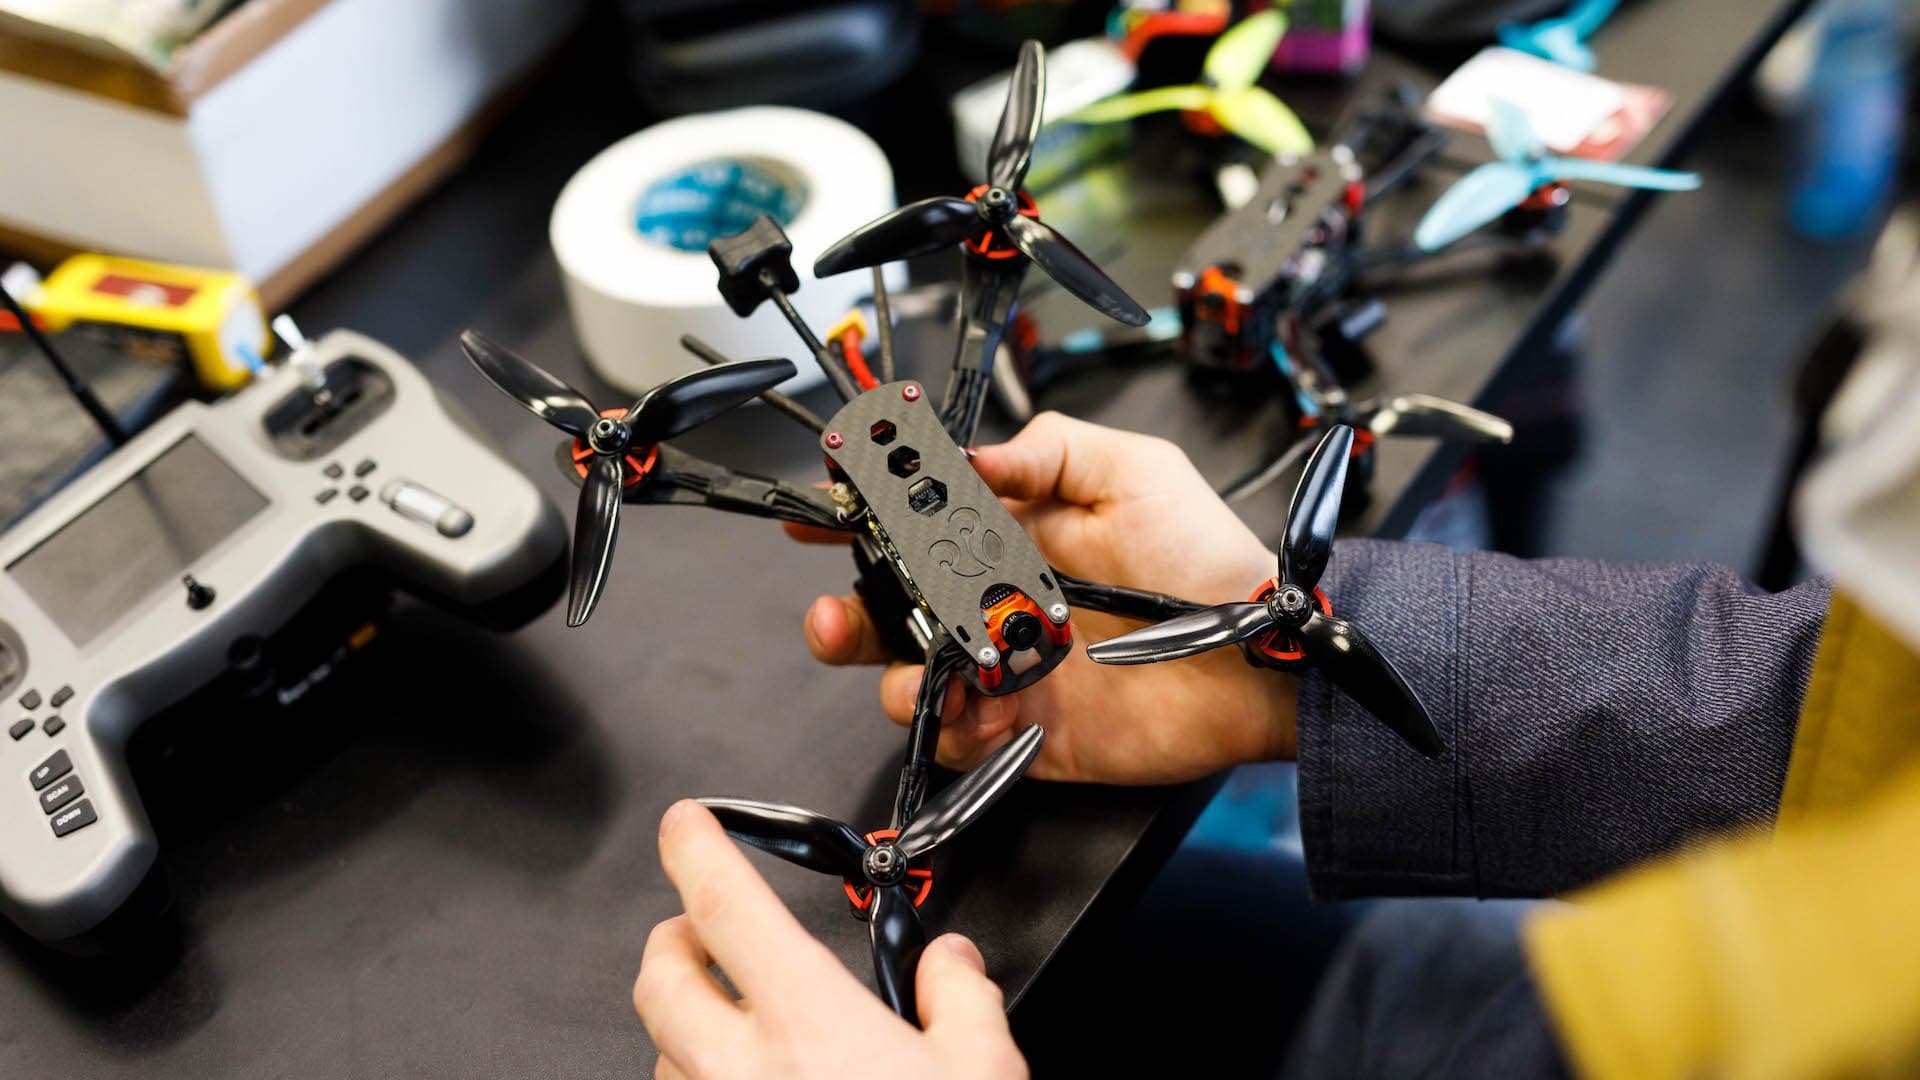 Abu Dhabi’s Krypto Labs Launches $1 Million Drone Design Competition